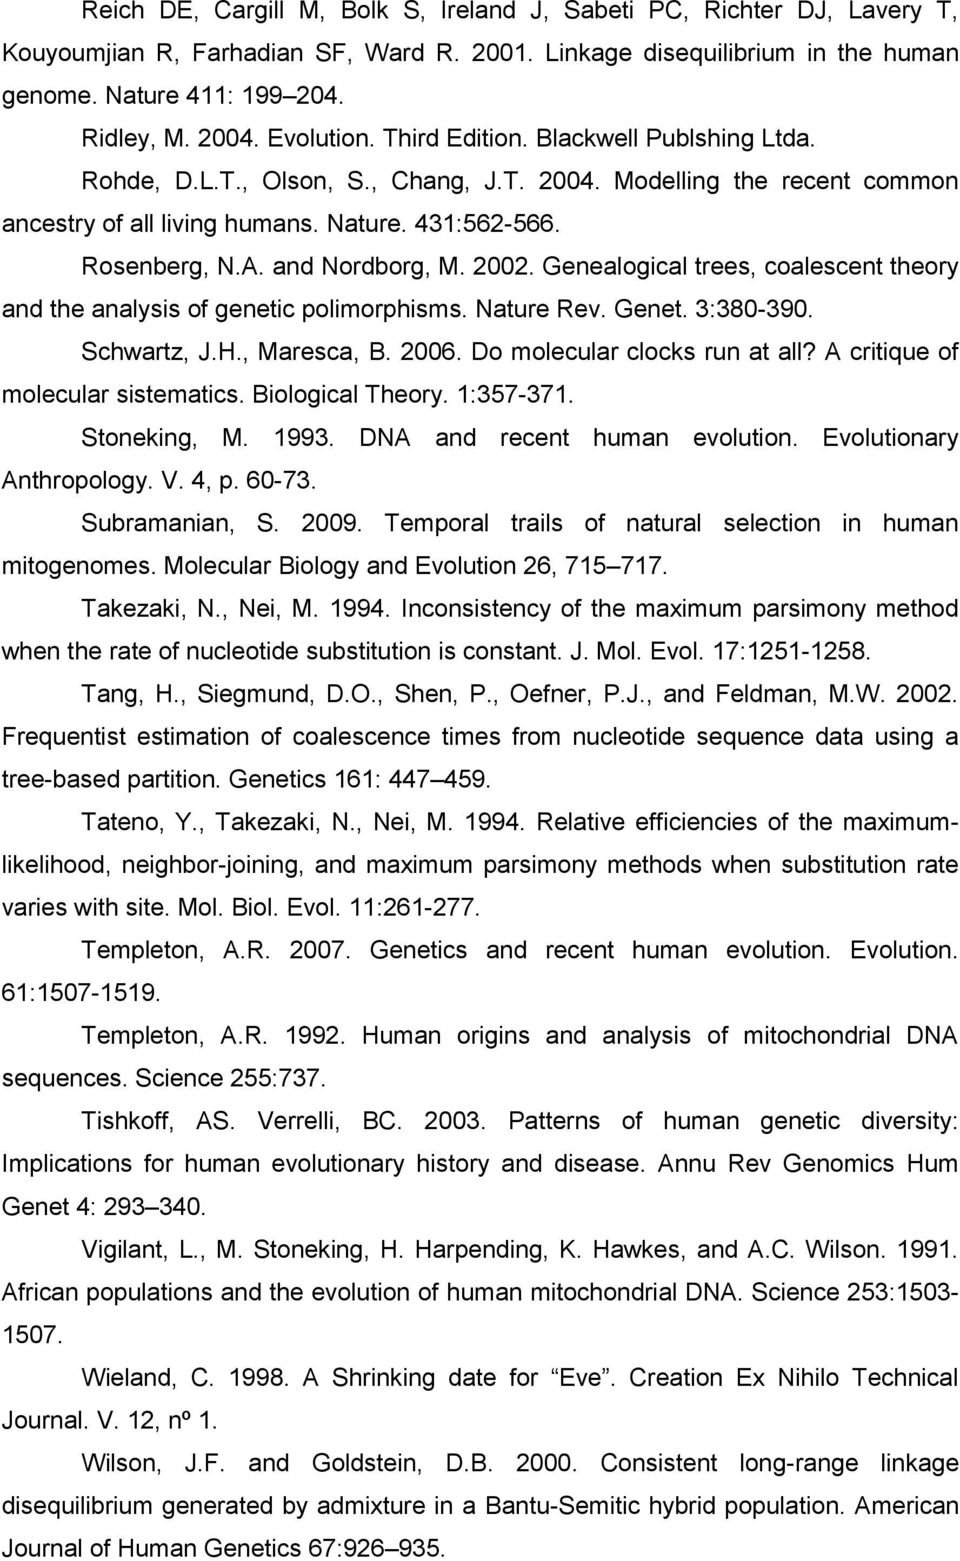 and Nordborg, M. 2002. Genealogical trees, coalescent theory and the analysis of genetic polimorphisms. Nature Rev. Genet. 3:380-390. Schwartz, J.H., Maresca, B. 2006. Do molecular clocks run at all?